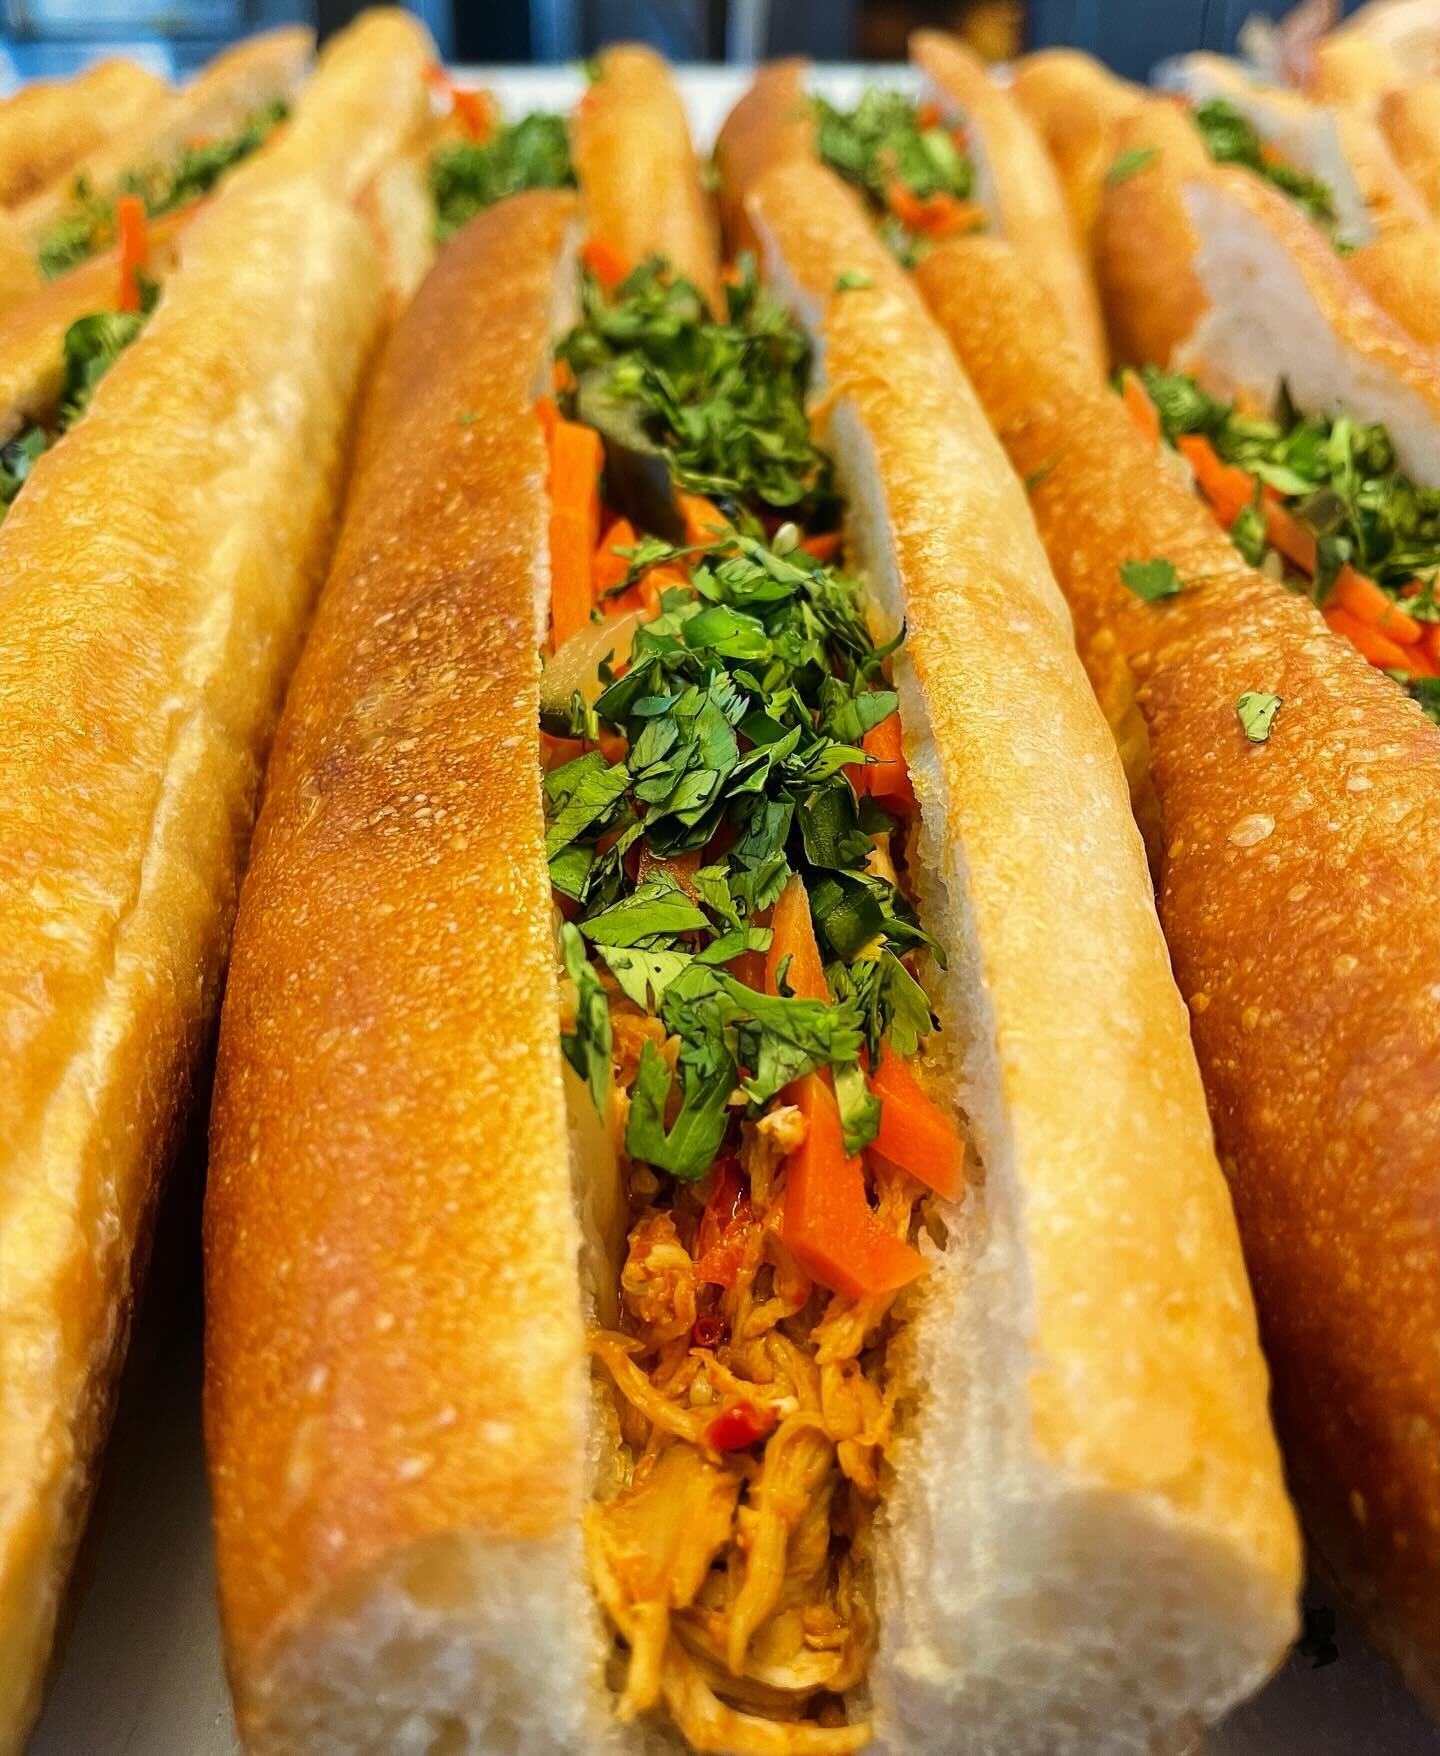 Bahn Mi is back! Roasted chicken tossed in a house made garlic chili sauce, @bluebuscultured kraut-chi, pickled cucumbers &amp; carrots, fresh jalape&ntilde;o, cilantro &amp; mayo on our baguette. We will have a limited amount of them made for grab a